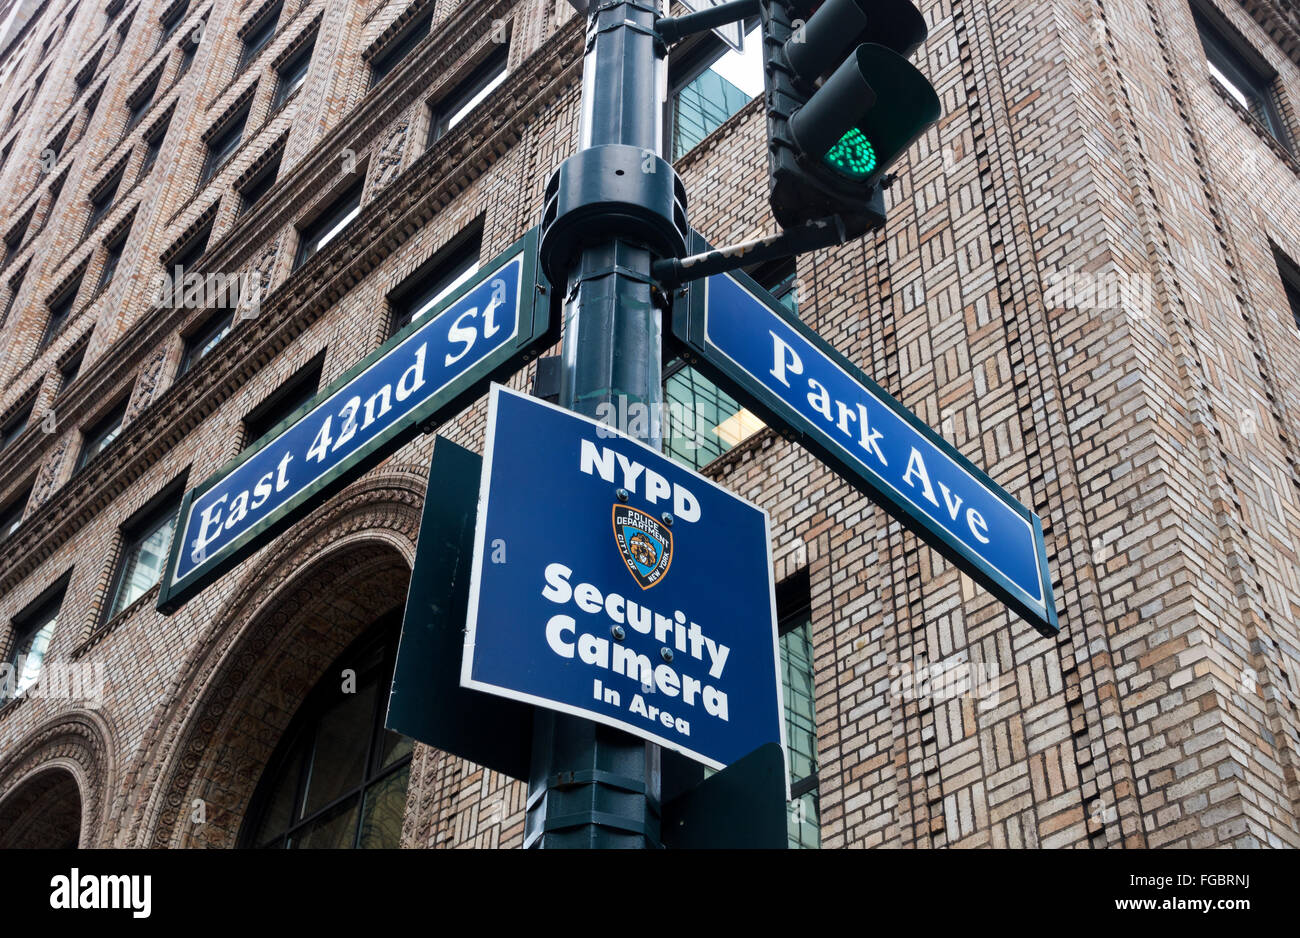 Street signs and NYPD security Camera notice at 42nd Street and Park Avenue in New York City Stock Photo